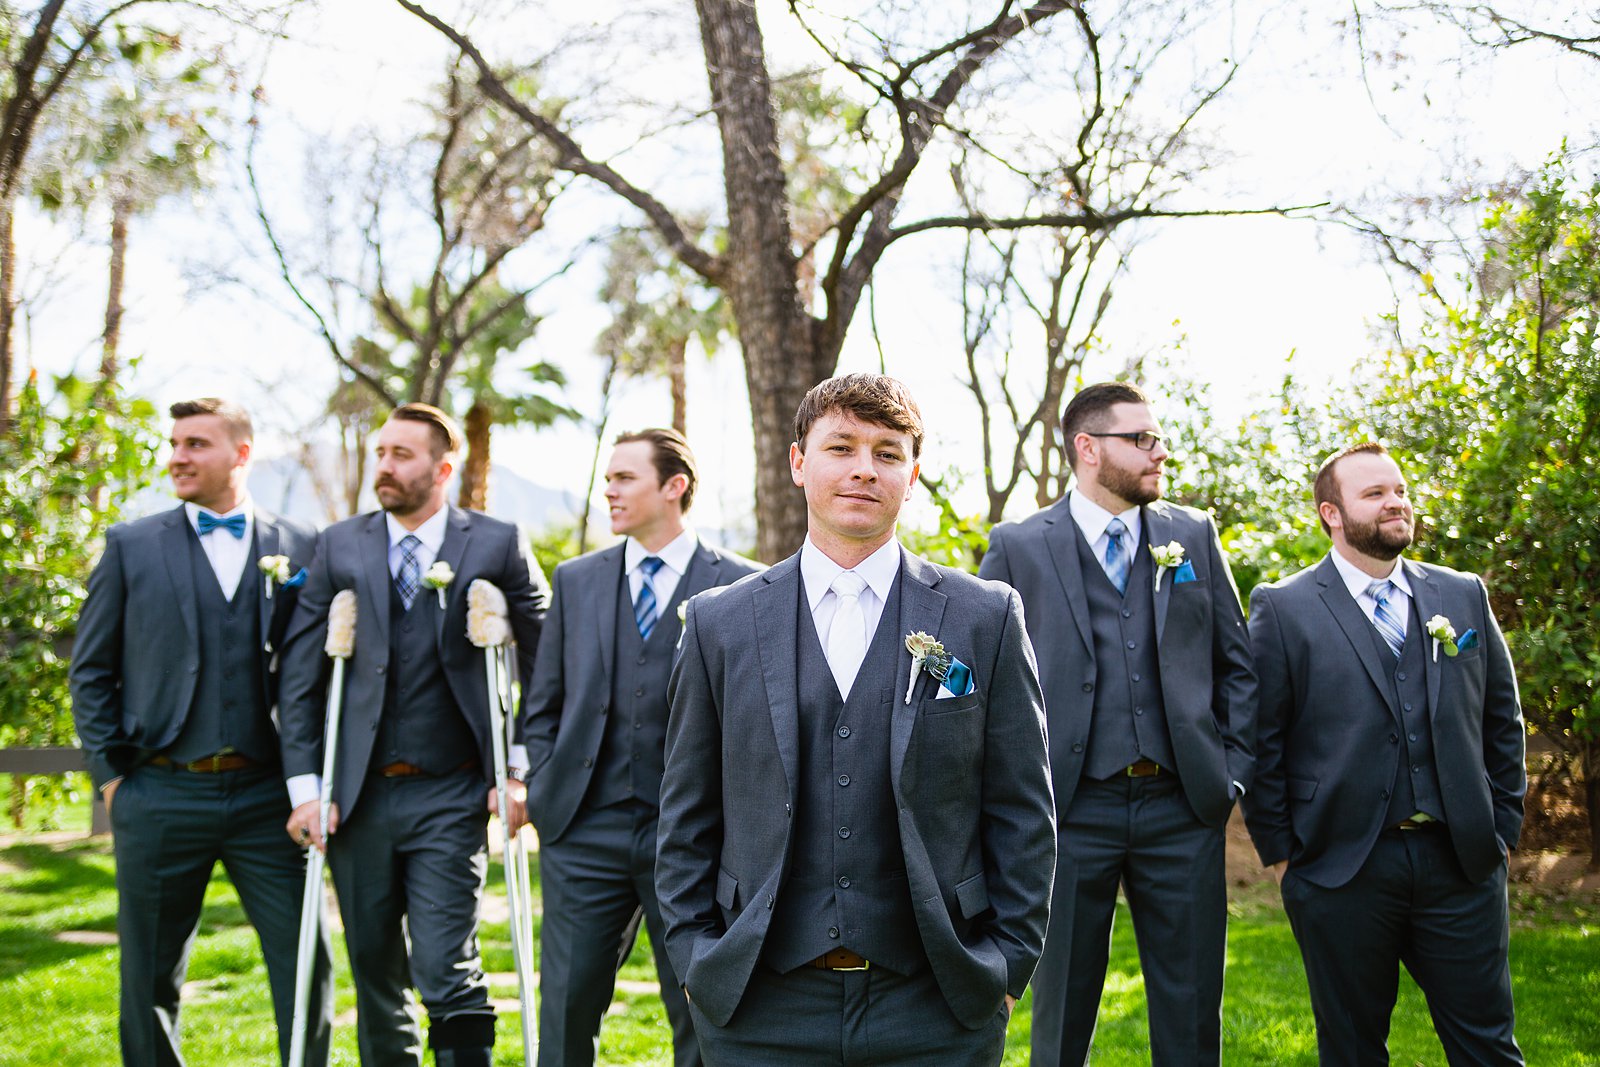 Groom and groomsmen together at a Venue At The Grove wedding by Arizona wedding photographer PMA Photography.